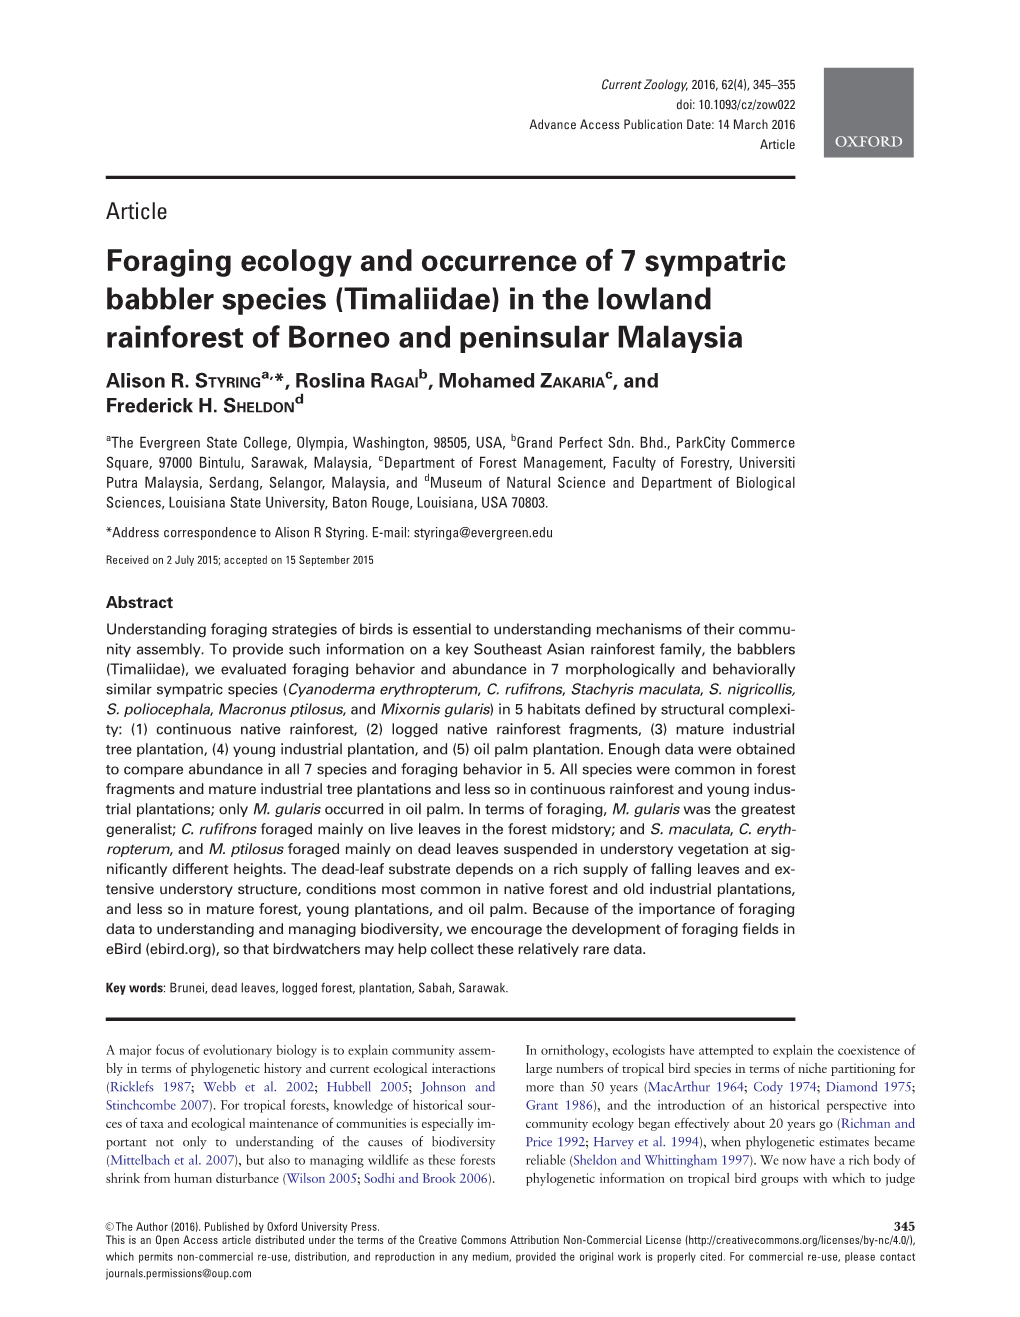 Foraging Ecology and Occurrence of 7 Sympatric Babbler Species (Timaliidae) in the Lowland Rainforest of Borneo and Peninsular Malaysia